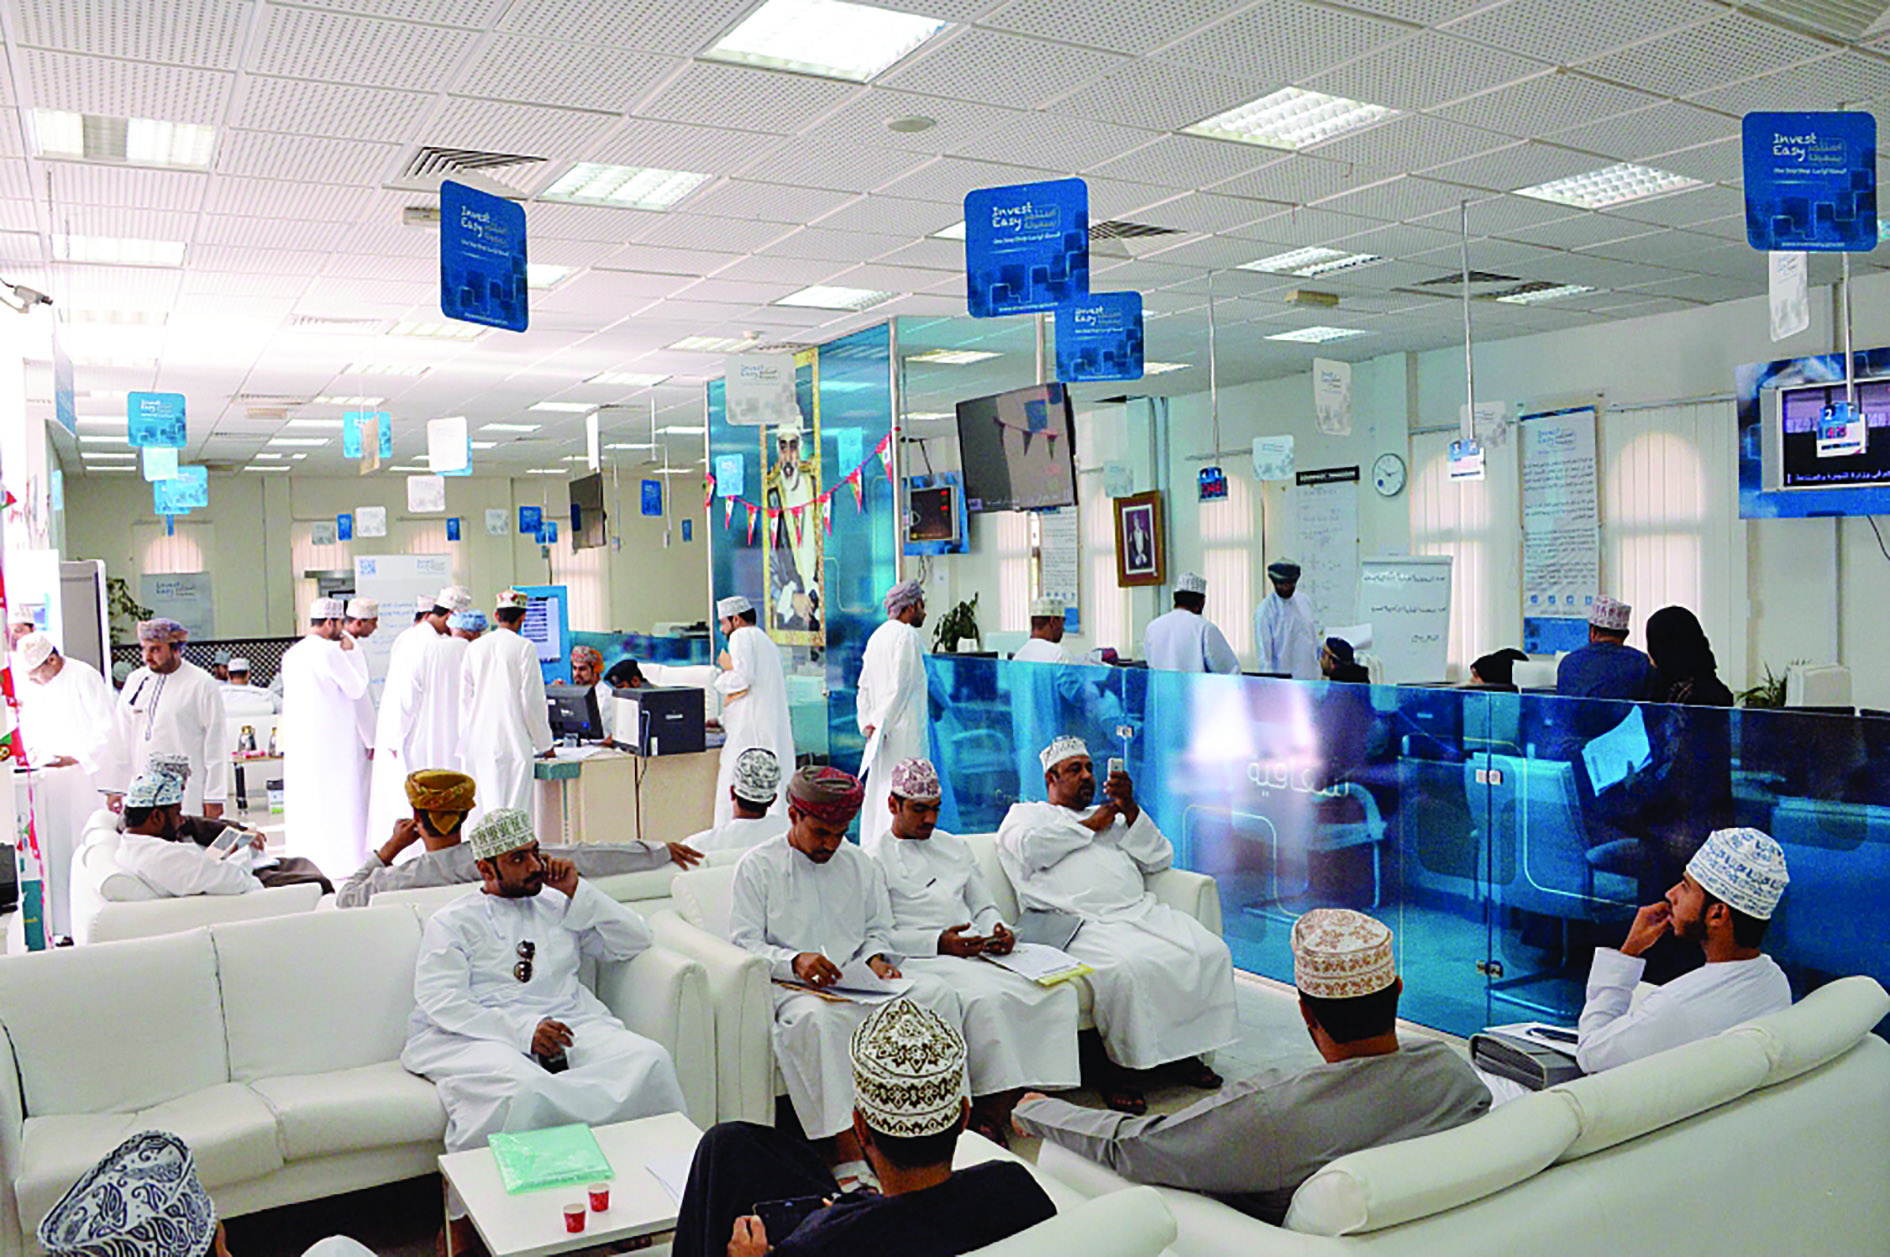 Invest Easy portal sees over 2000 transactions completed over Eid